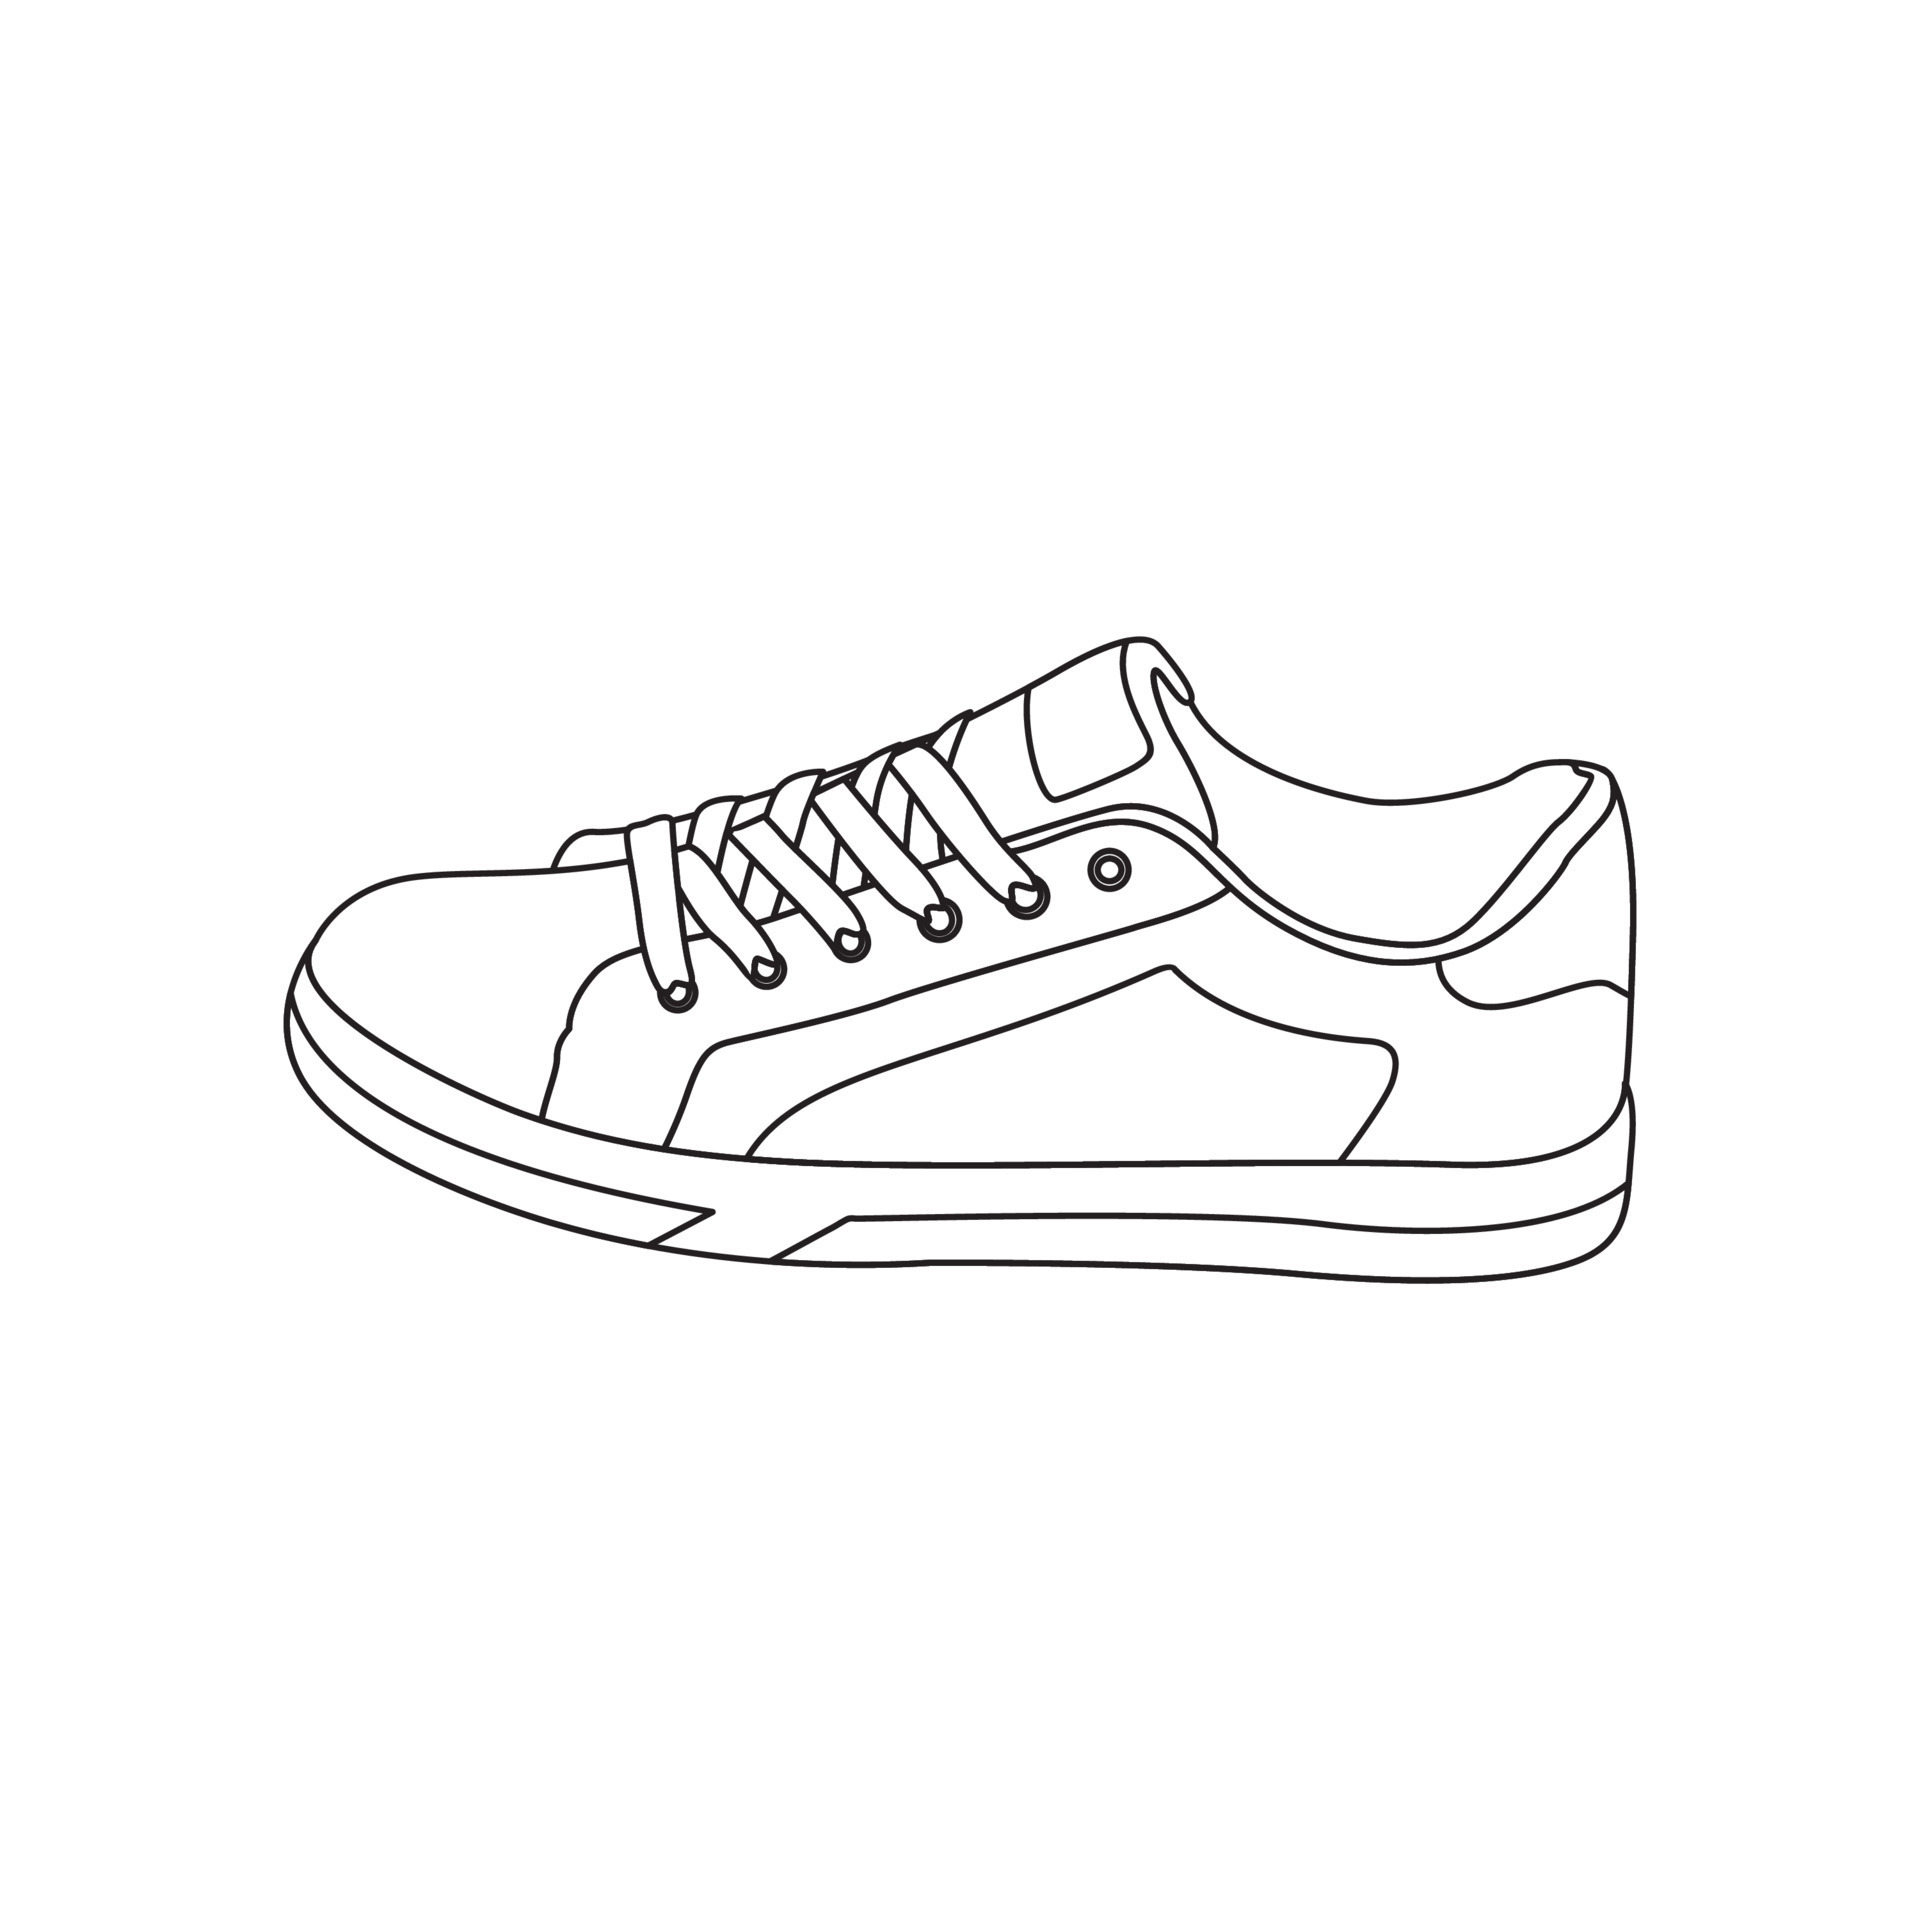 Shoe line art style isolated on a white background 21579401 Vector Art ...